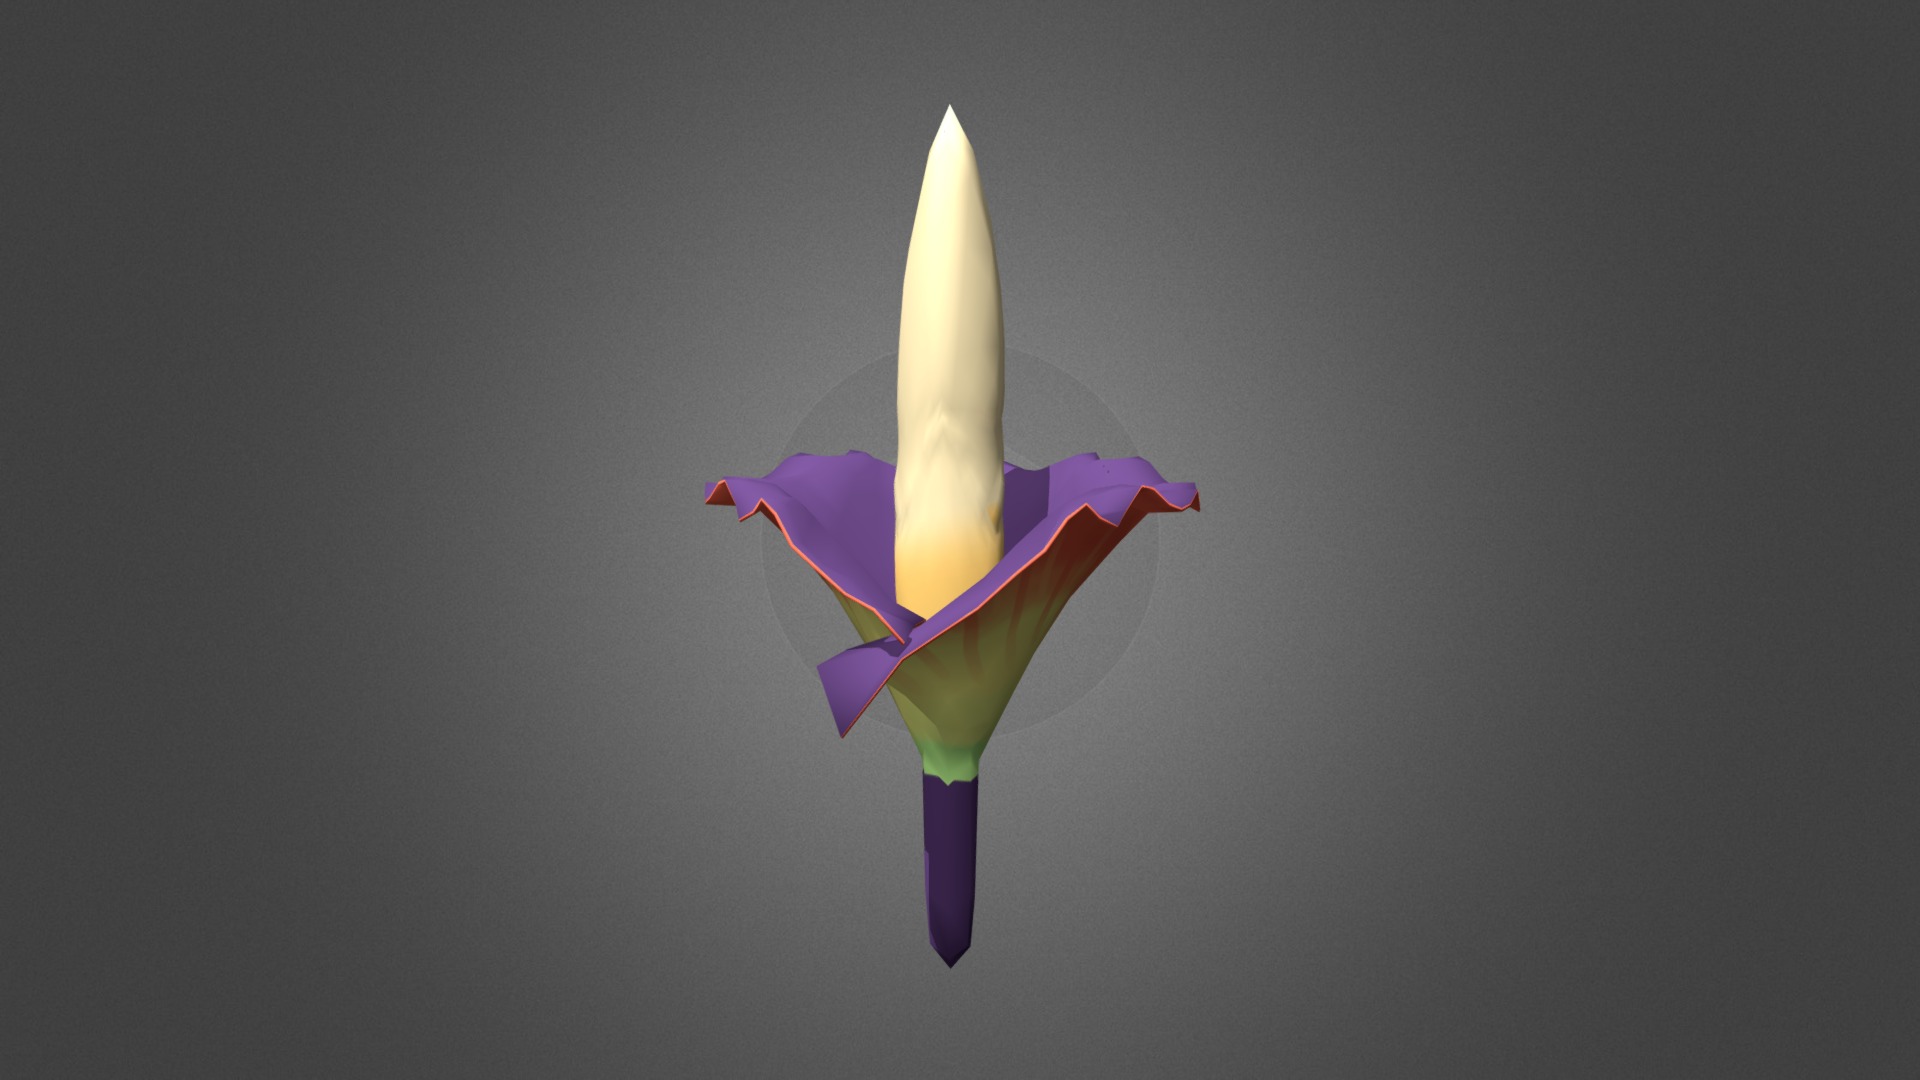 3D model Titan Arum – Amorphophallus titanum - This is a 3D model of the Titan Arum - Amorphophallus titanum. The 3D model is about a lit candle with a flame.